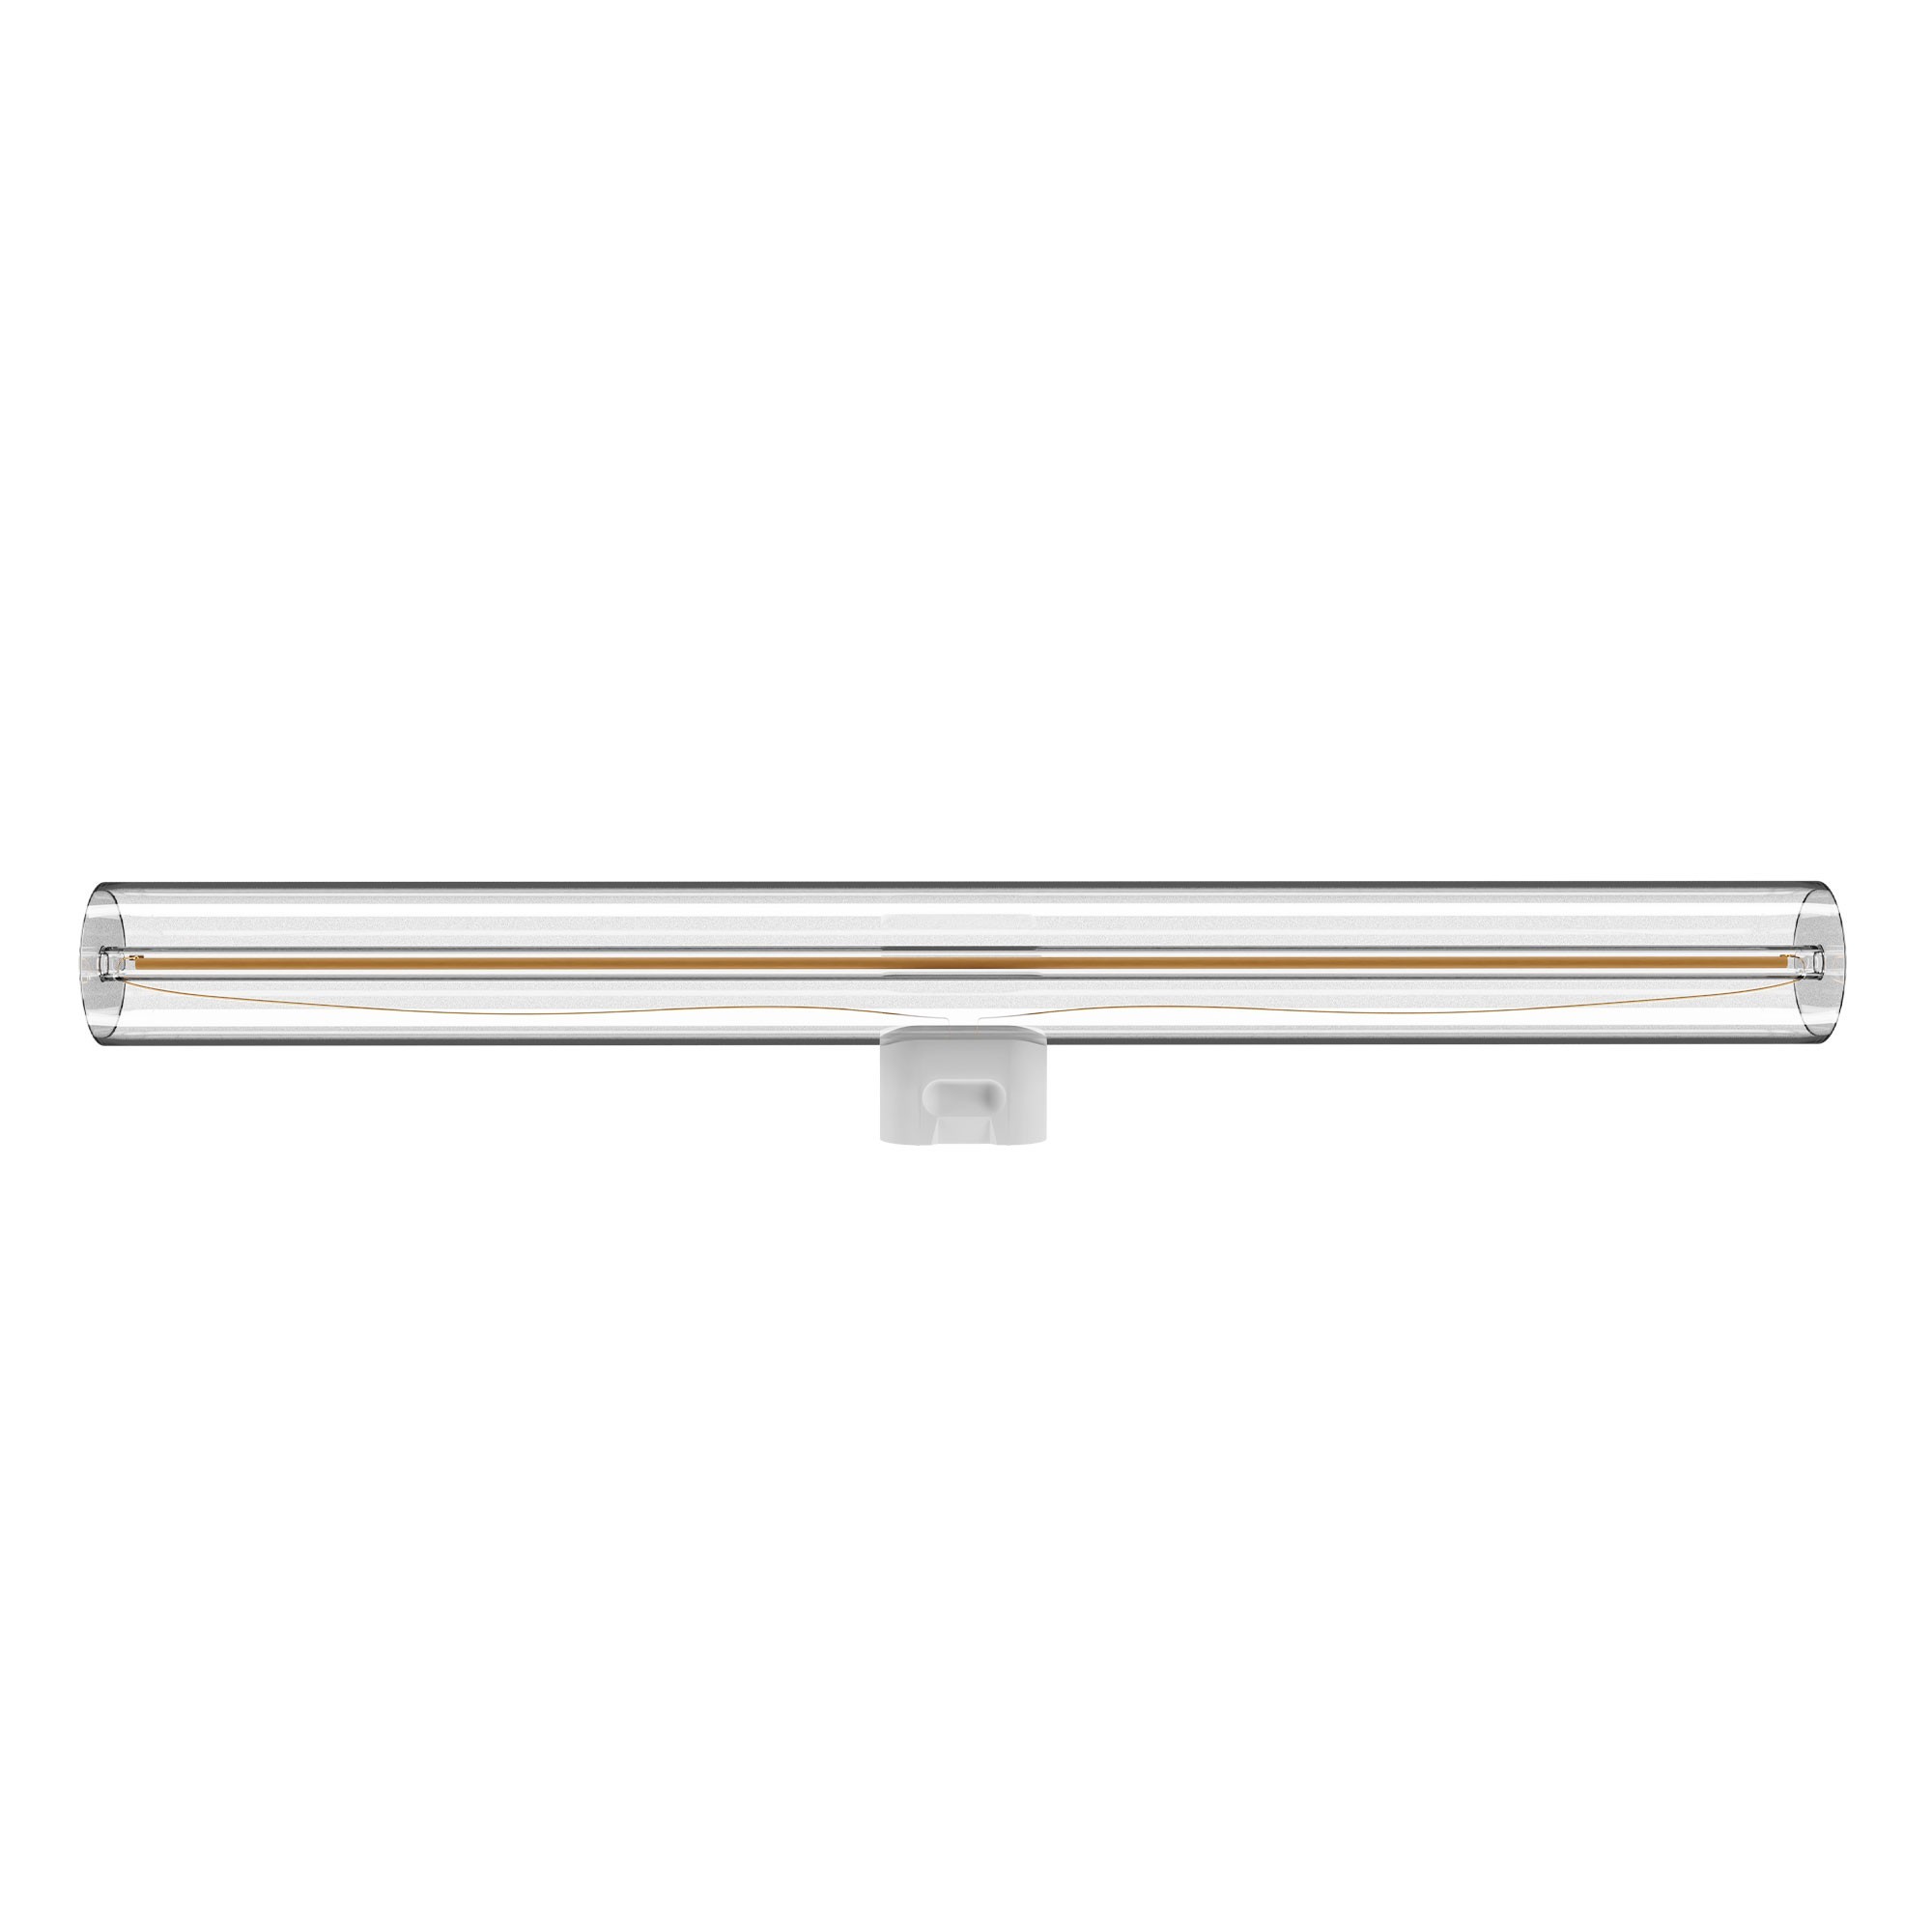 S01 - Linear LED light bulb L300, S14d, 6W, 2700K, 520Lm, with clear glass